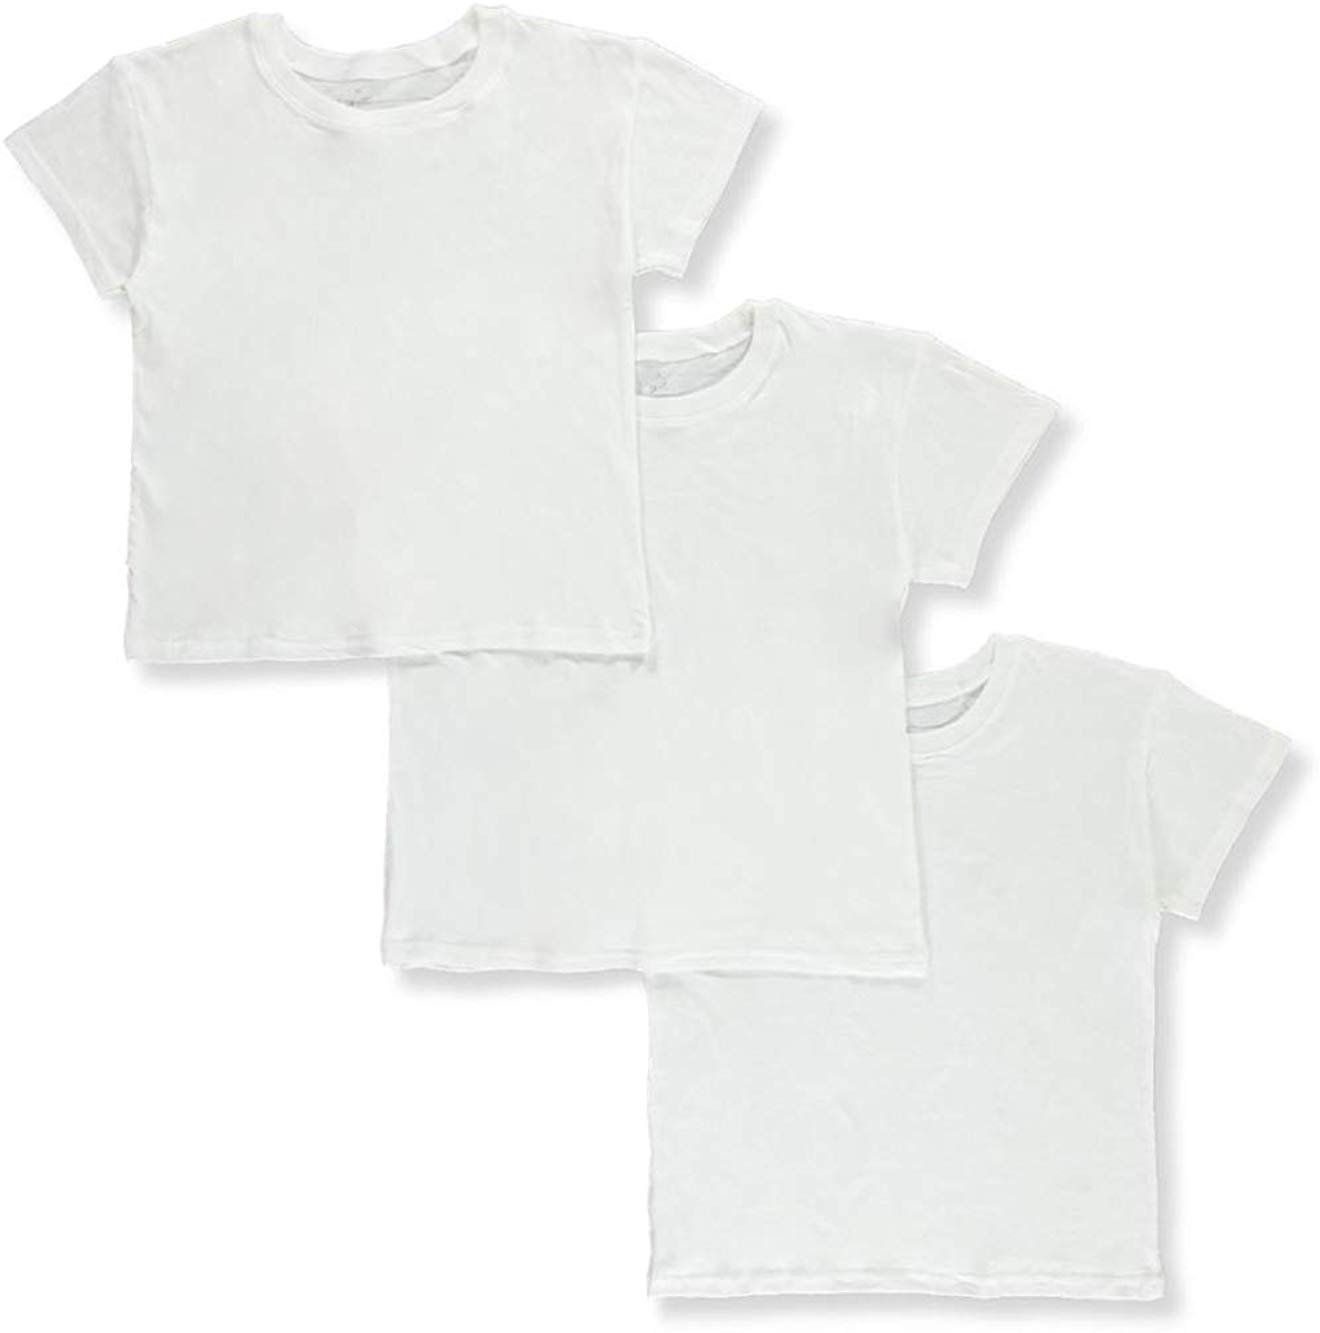 3 Pack Tag Free White Crew Neck T-shirts Toddler 2T/3T 